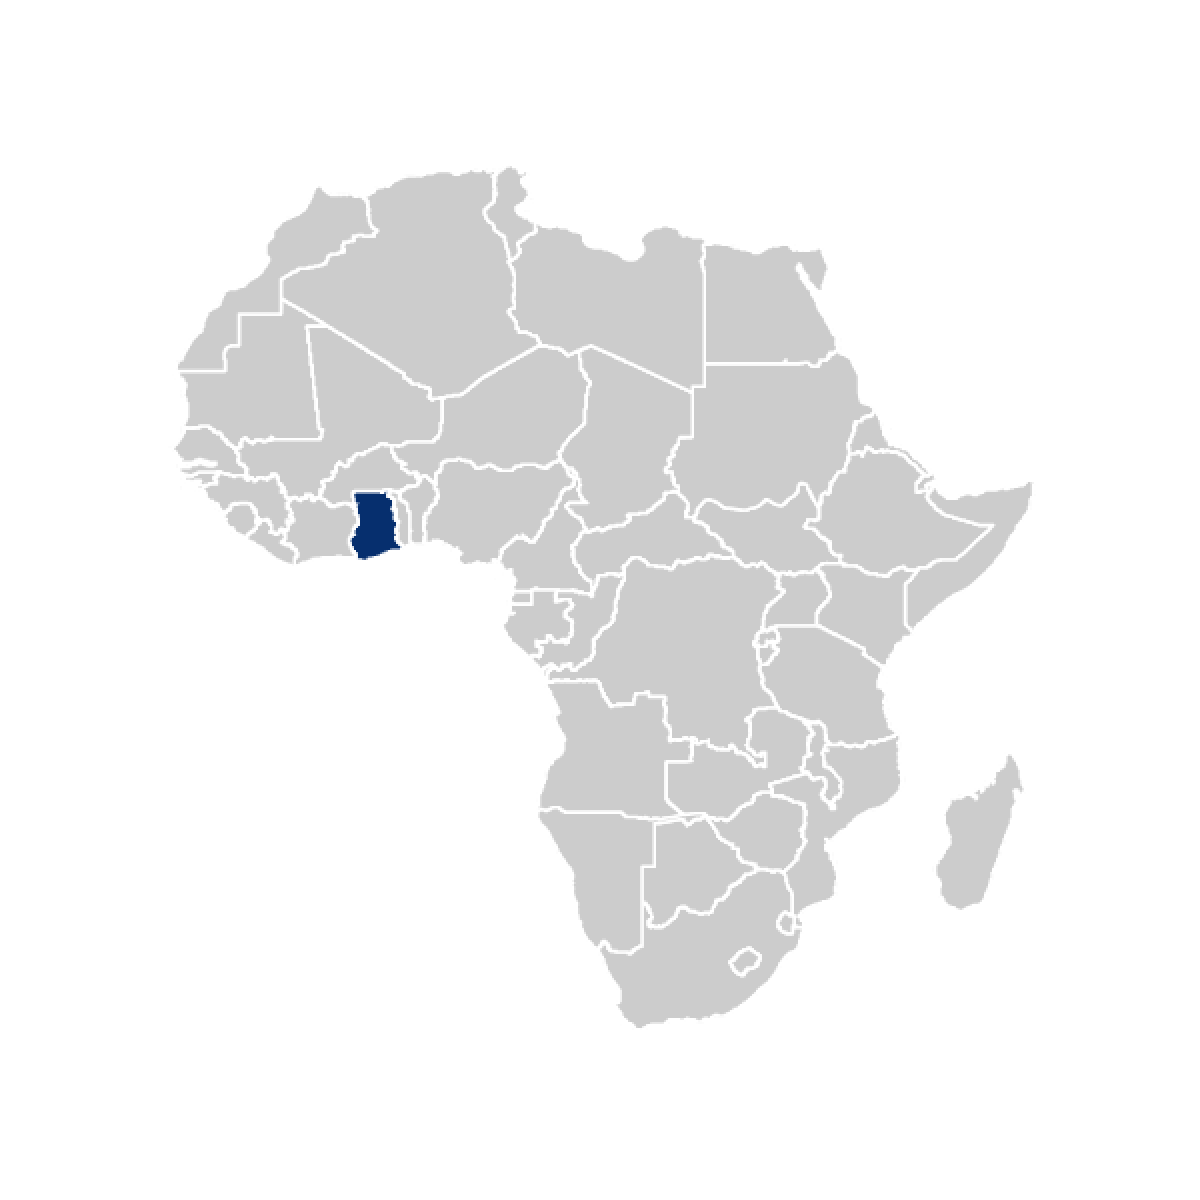 Ghana highlighted in map of Africa